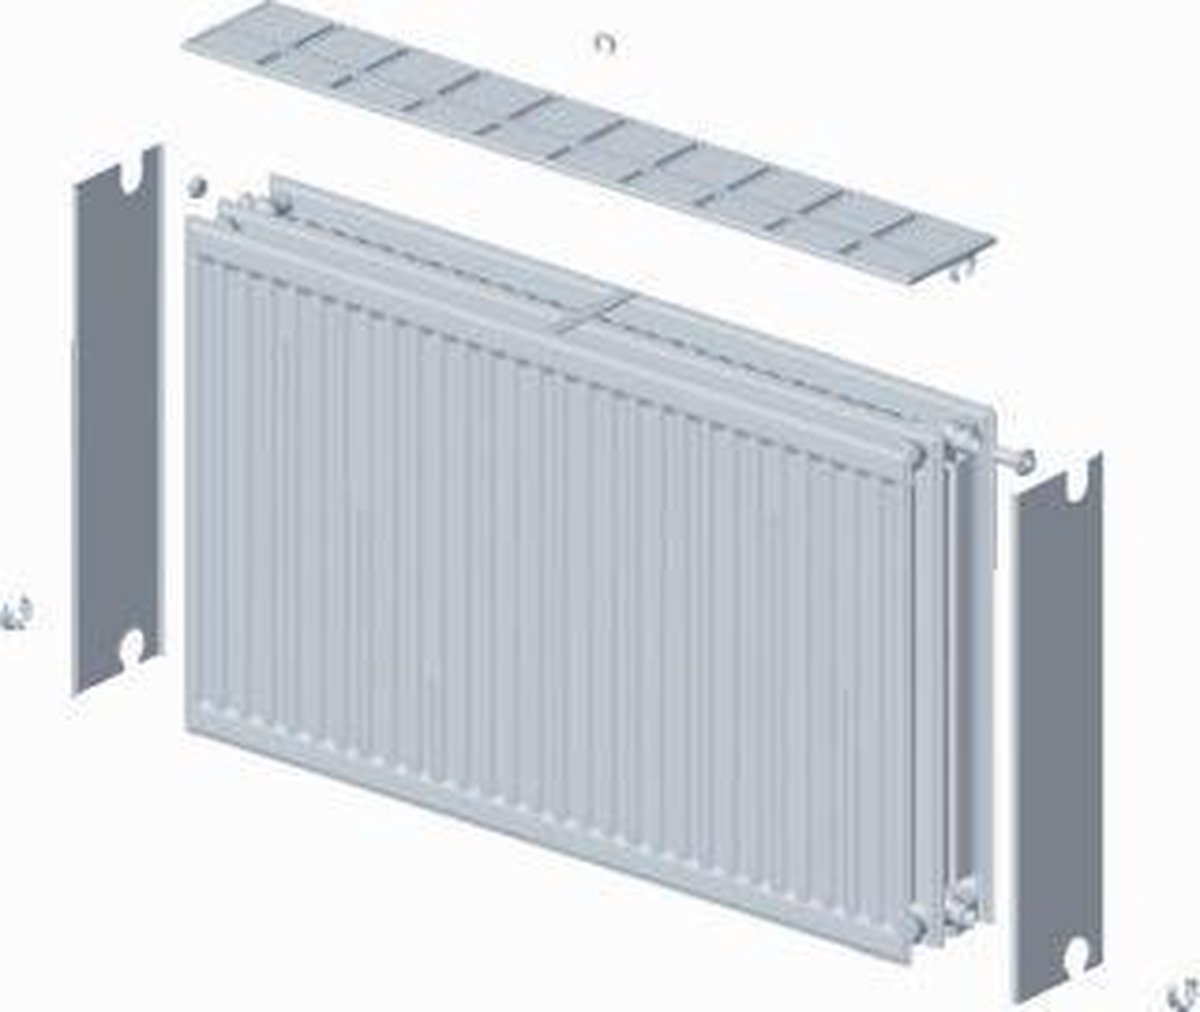 Stelrad paneelradiator Novello, staal, wit, (hxlxd) 400x2400x158mm, 33